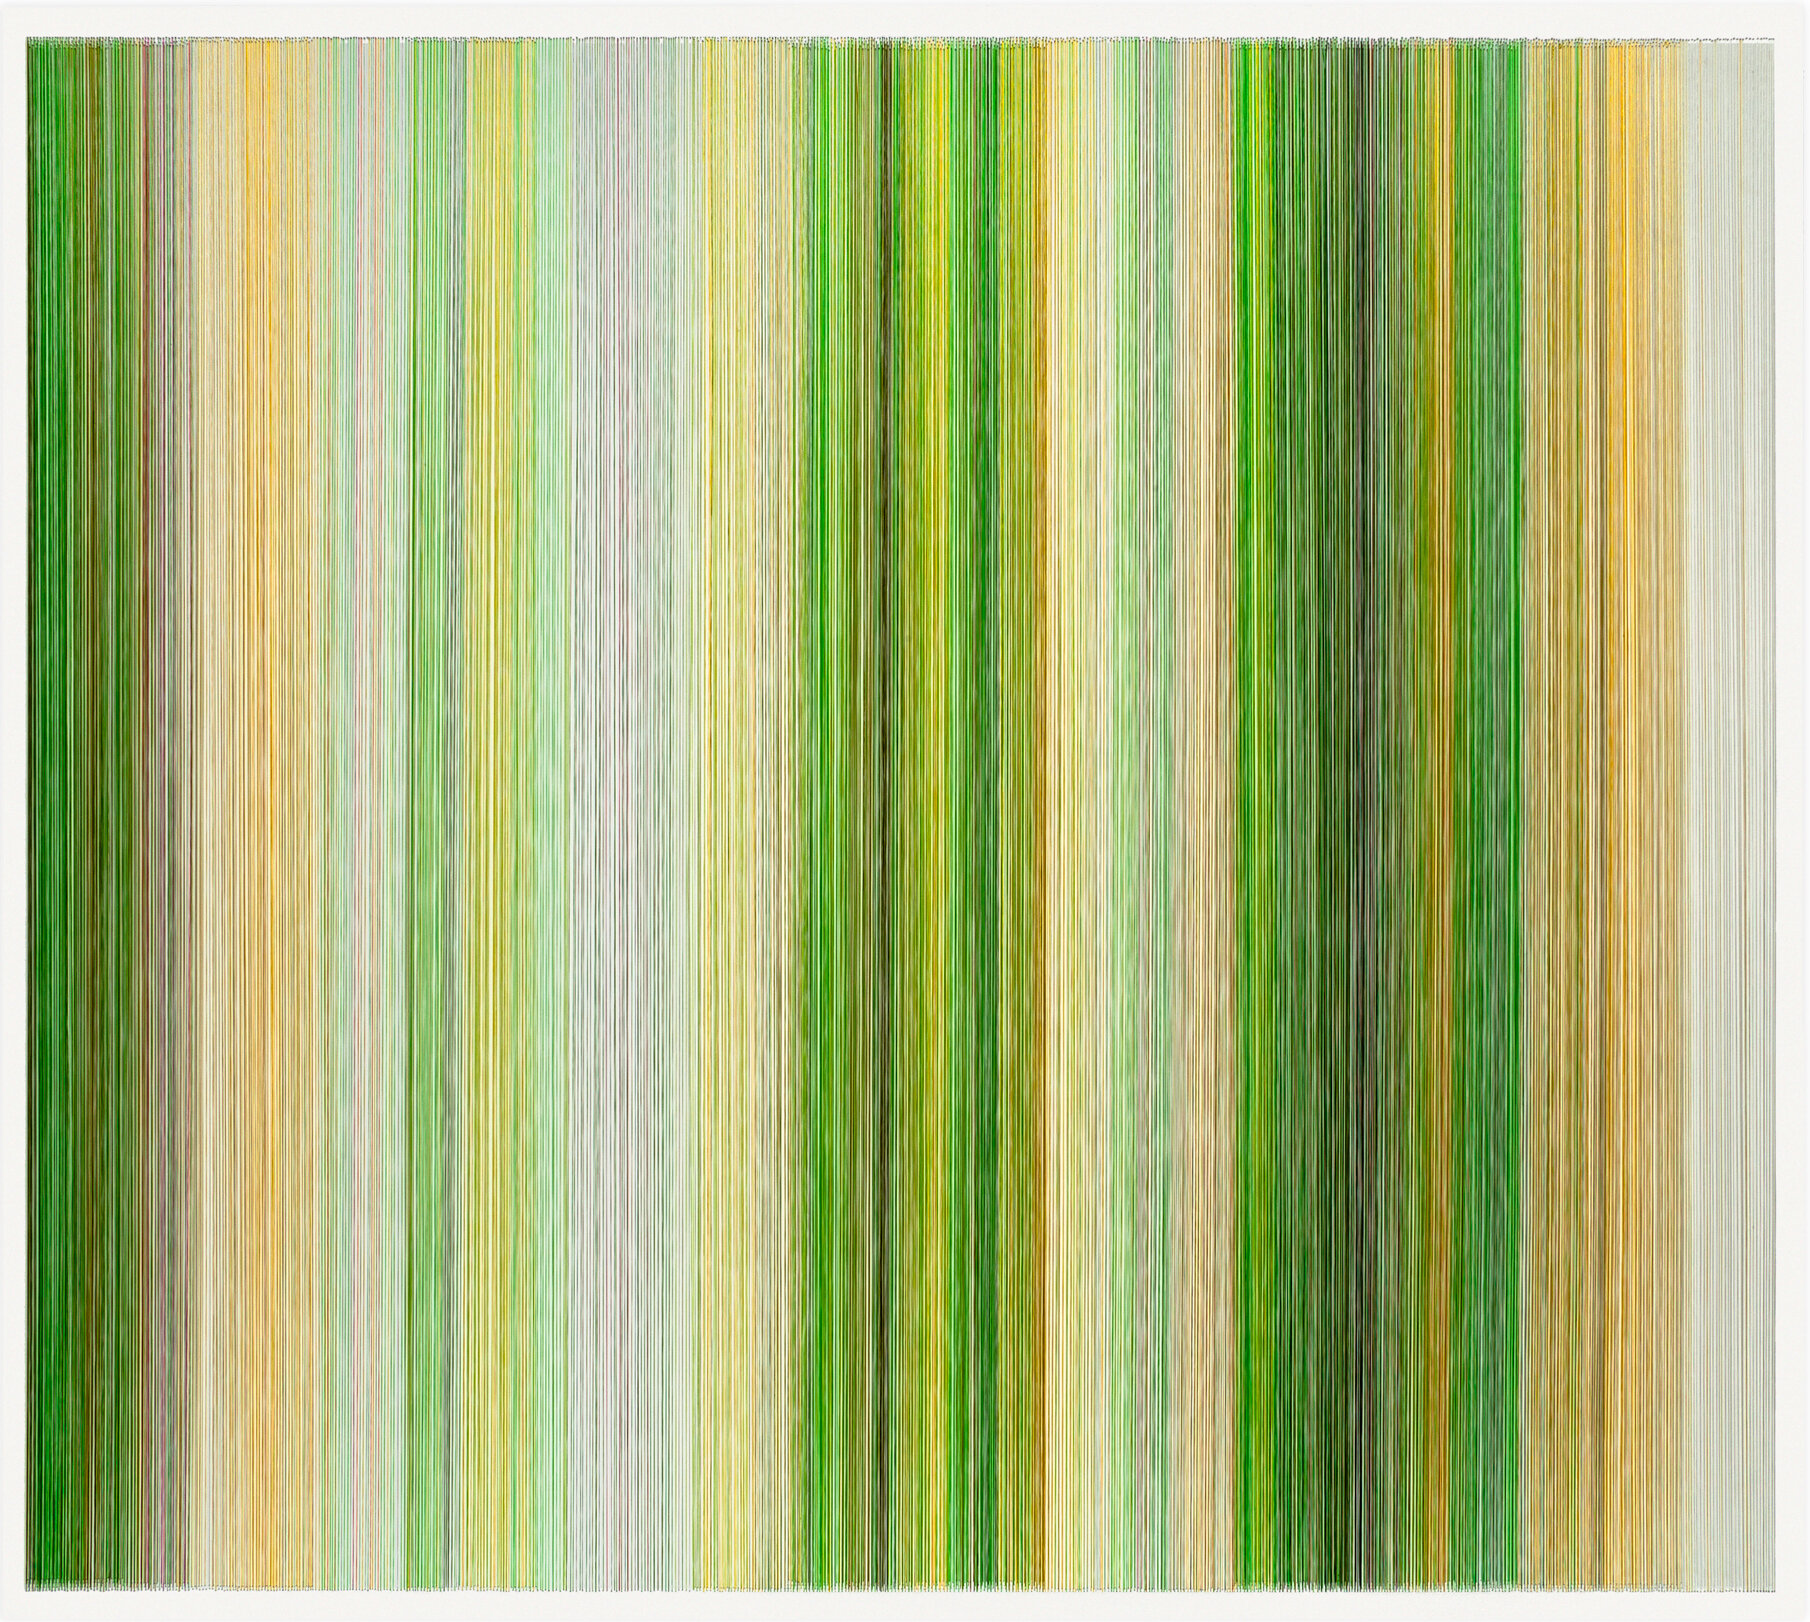    thread drawing 07   2011 rayon thread 51 by 58 inches Polsinelli Schghardt LLP, Kansas City, MO 